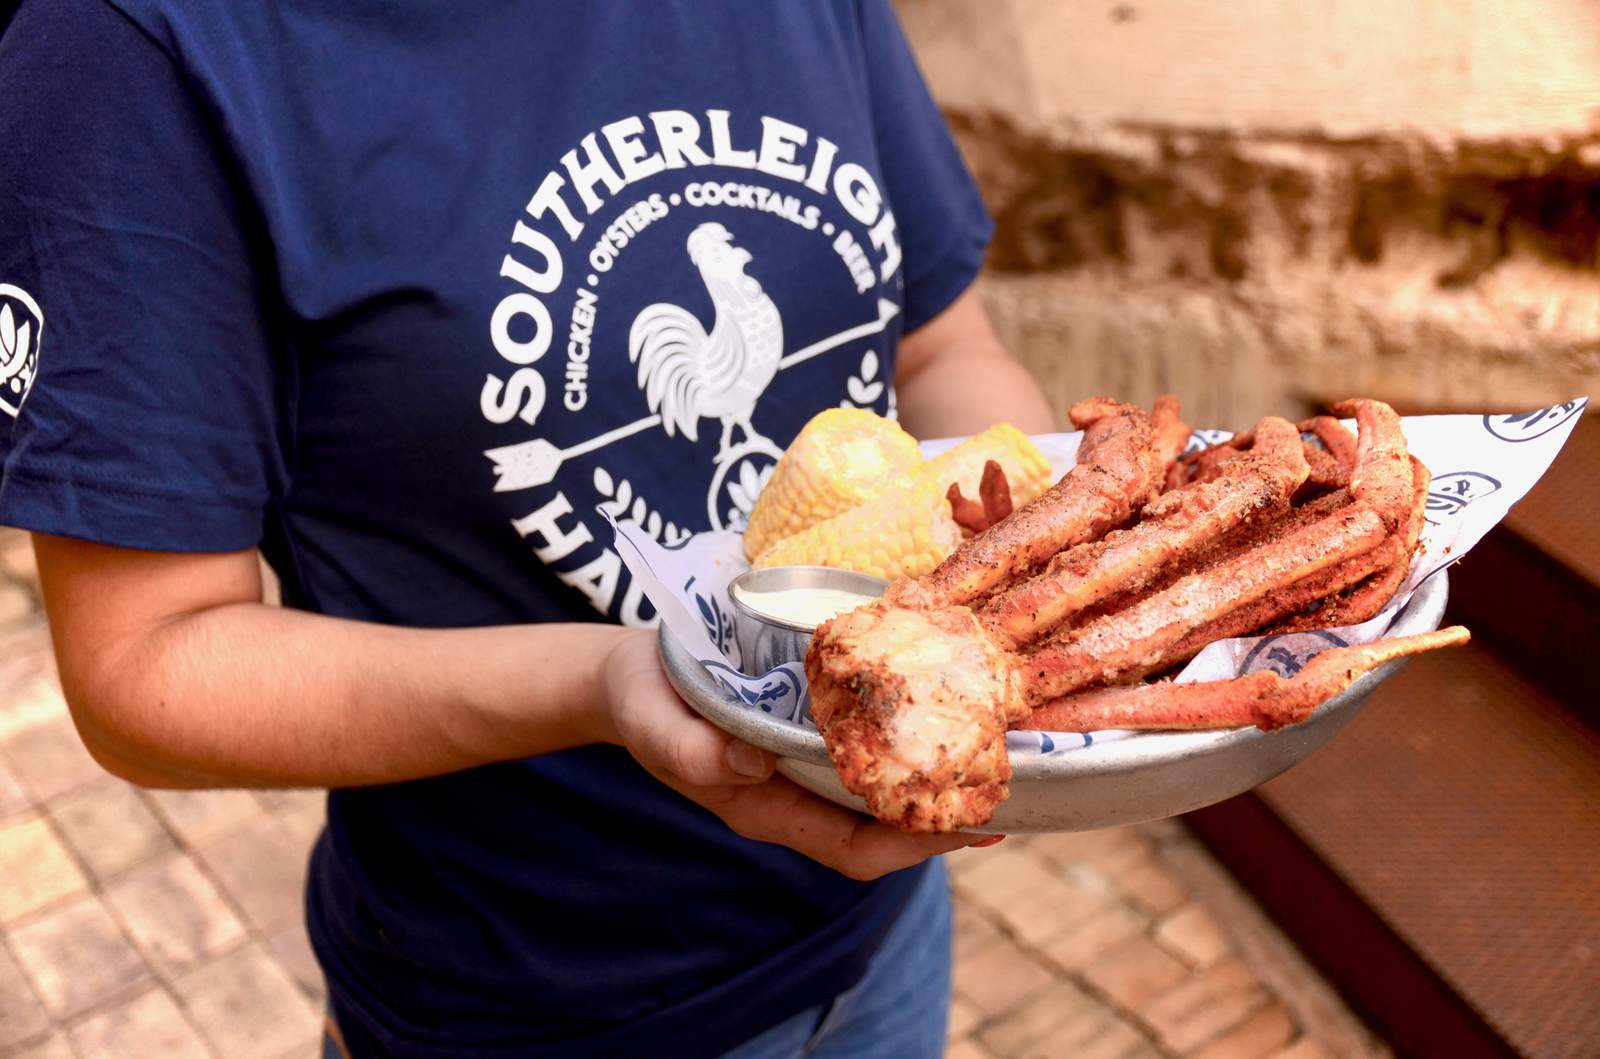 Southerleigh to open new dining concept on the Northwest side